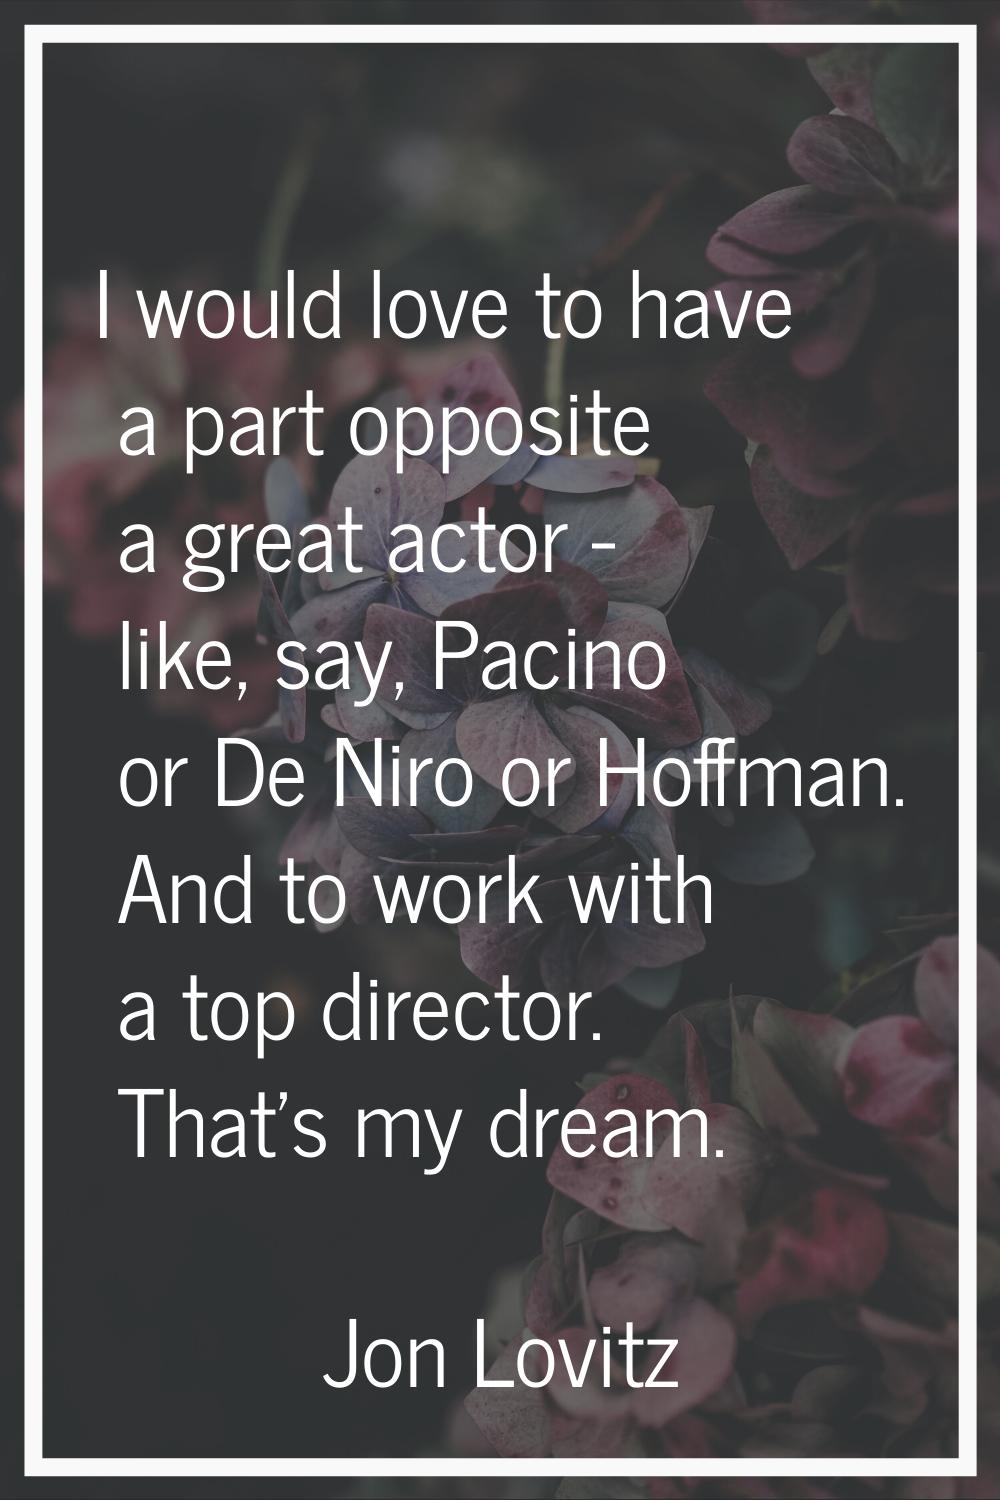 I would love to have a part opposite a great actor - like, say, Pacino or De Niro or Hoffman. And t